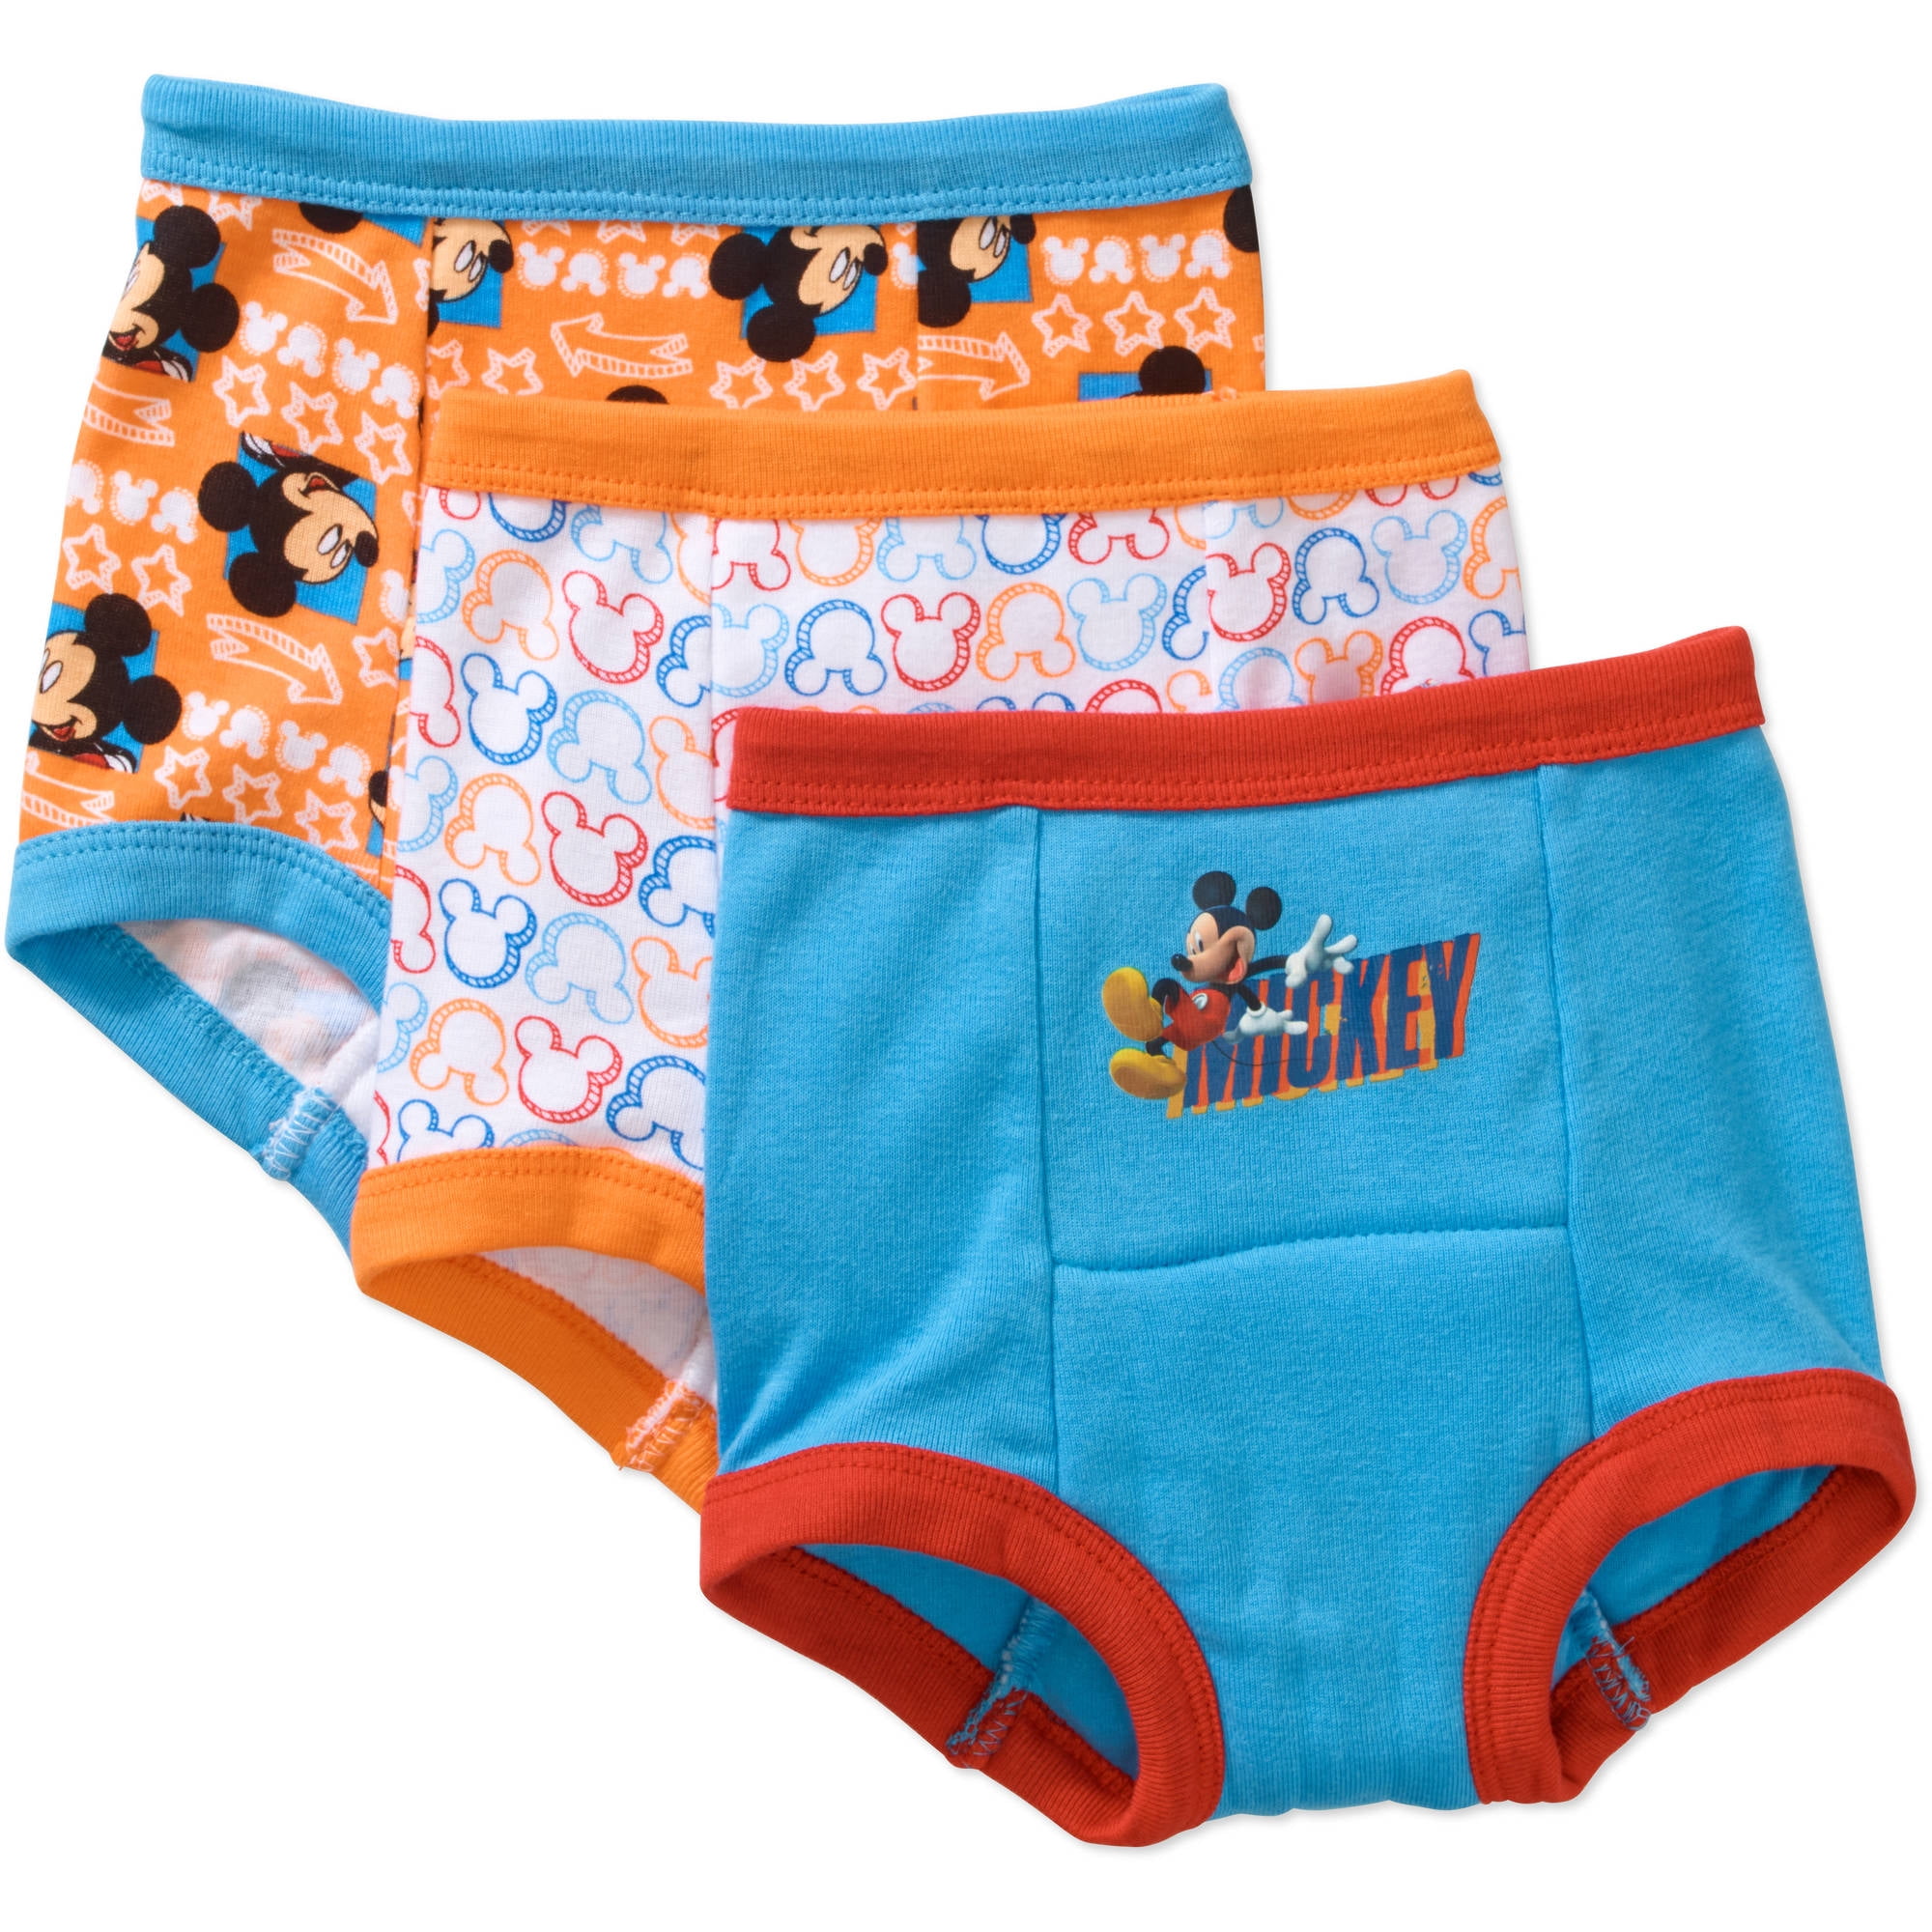 Details about   Kids Boys Toddlers Thomas The Tank Engine 2 Pack Vests Underwear Size 1-5 Years 